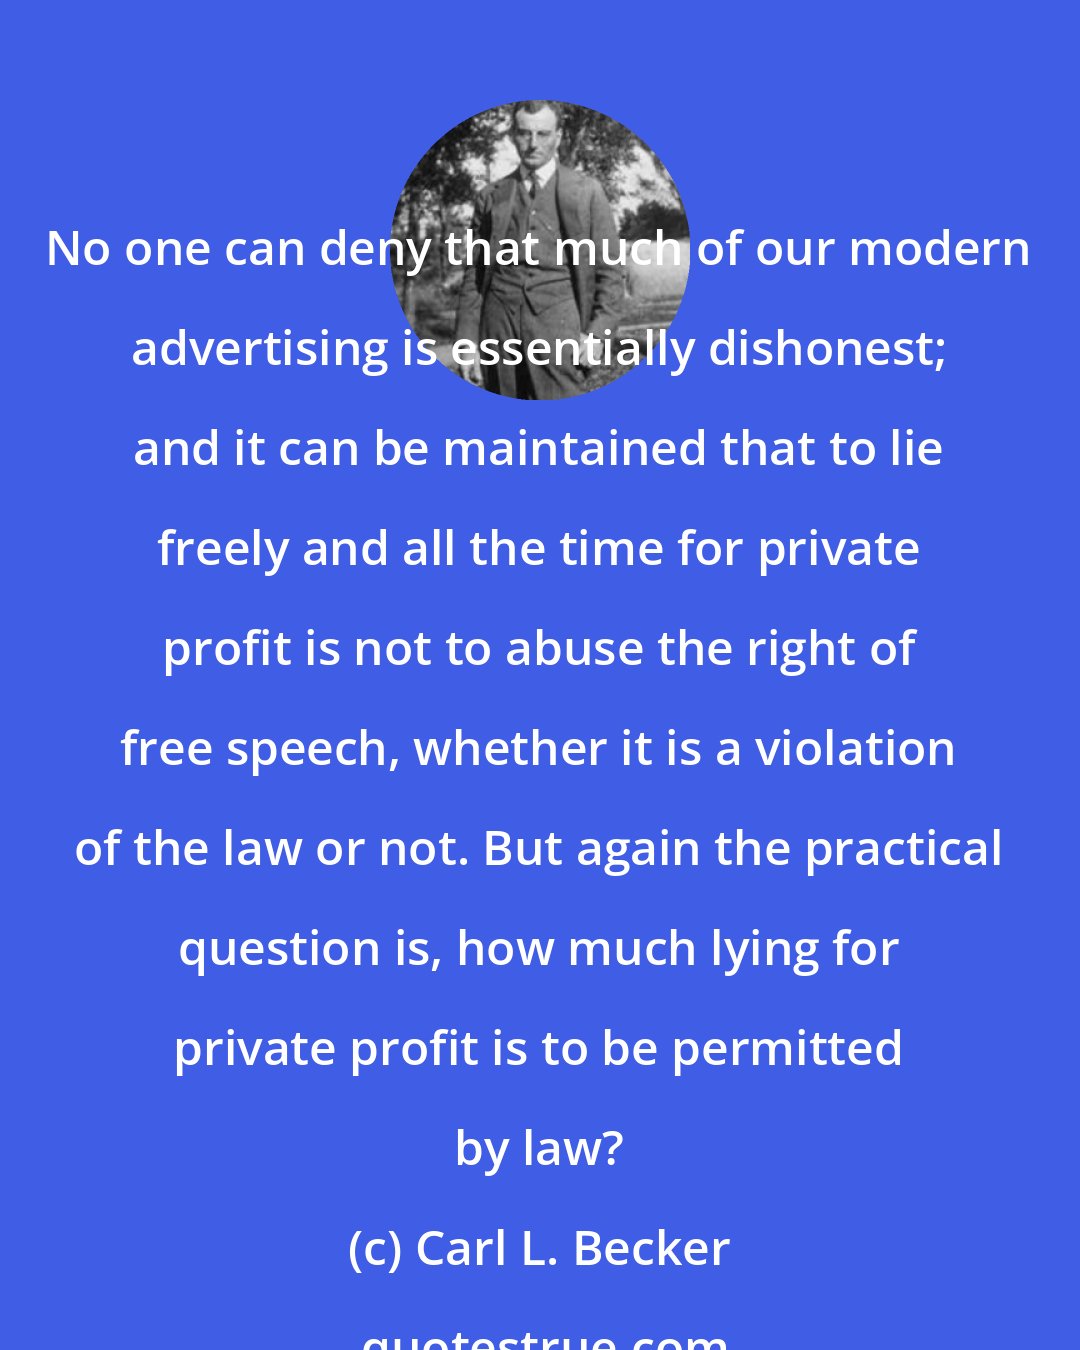 Carl L. Becker: No one can deny that much of our modern advertising is essentially dishonest; and it can be maintained that to lie freely and all the time for private profit is not to abuse the right of free speech, whether it is a violation of the law or not. But again the practical question is, how much lying for private profit is to be permitted by law?